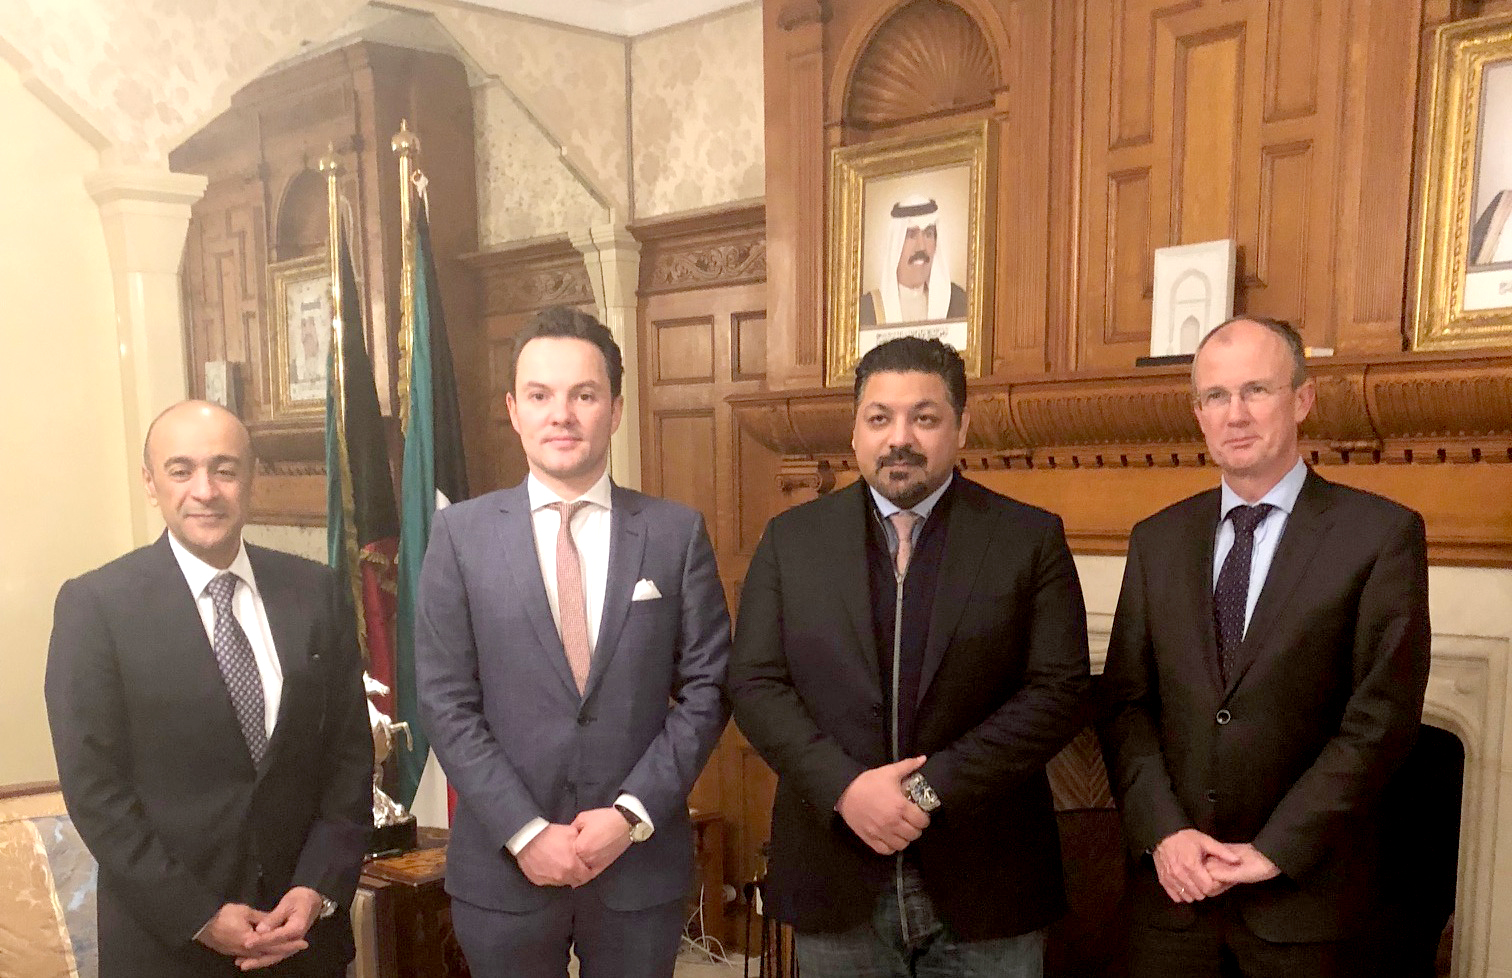 Ambassador of Kuwait Jasem Al Budaiwi with Director General of Kuwait ports Authority Yousef Abdullah Al-Sabah with two Antwerp Port officials